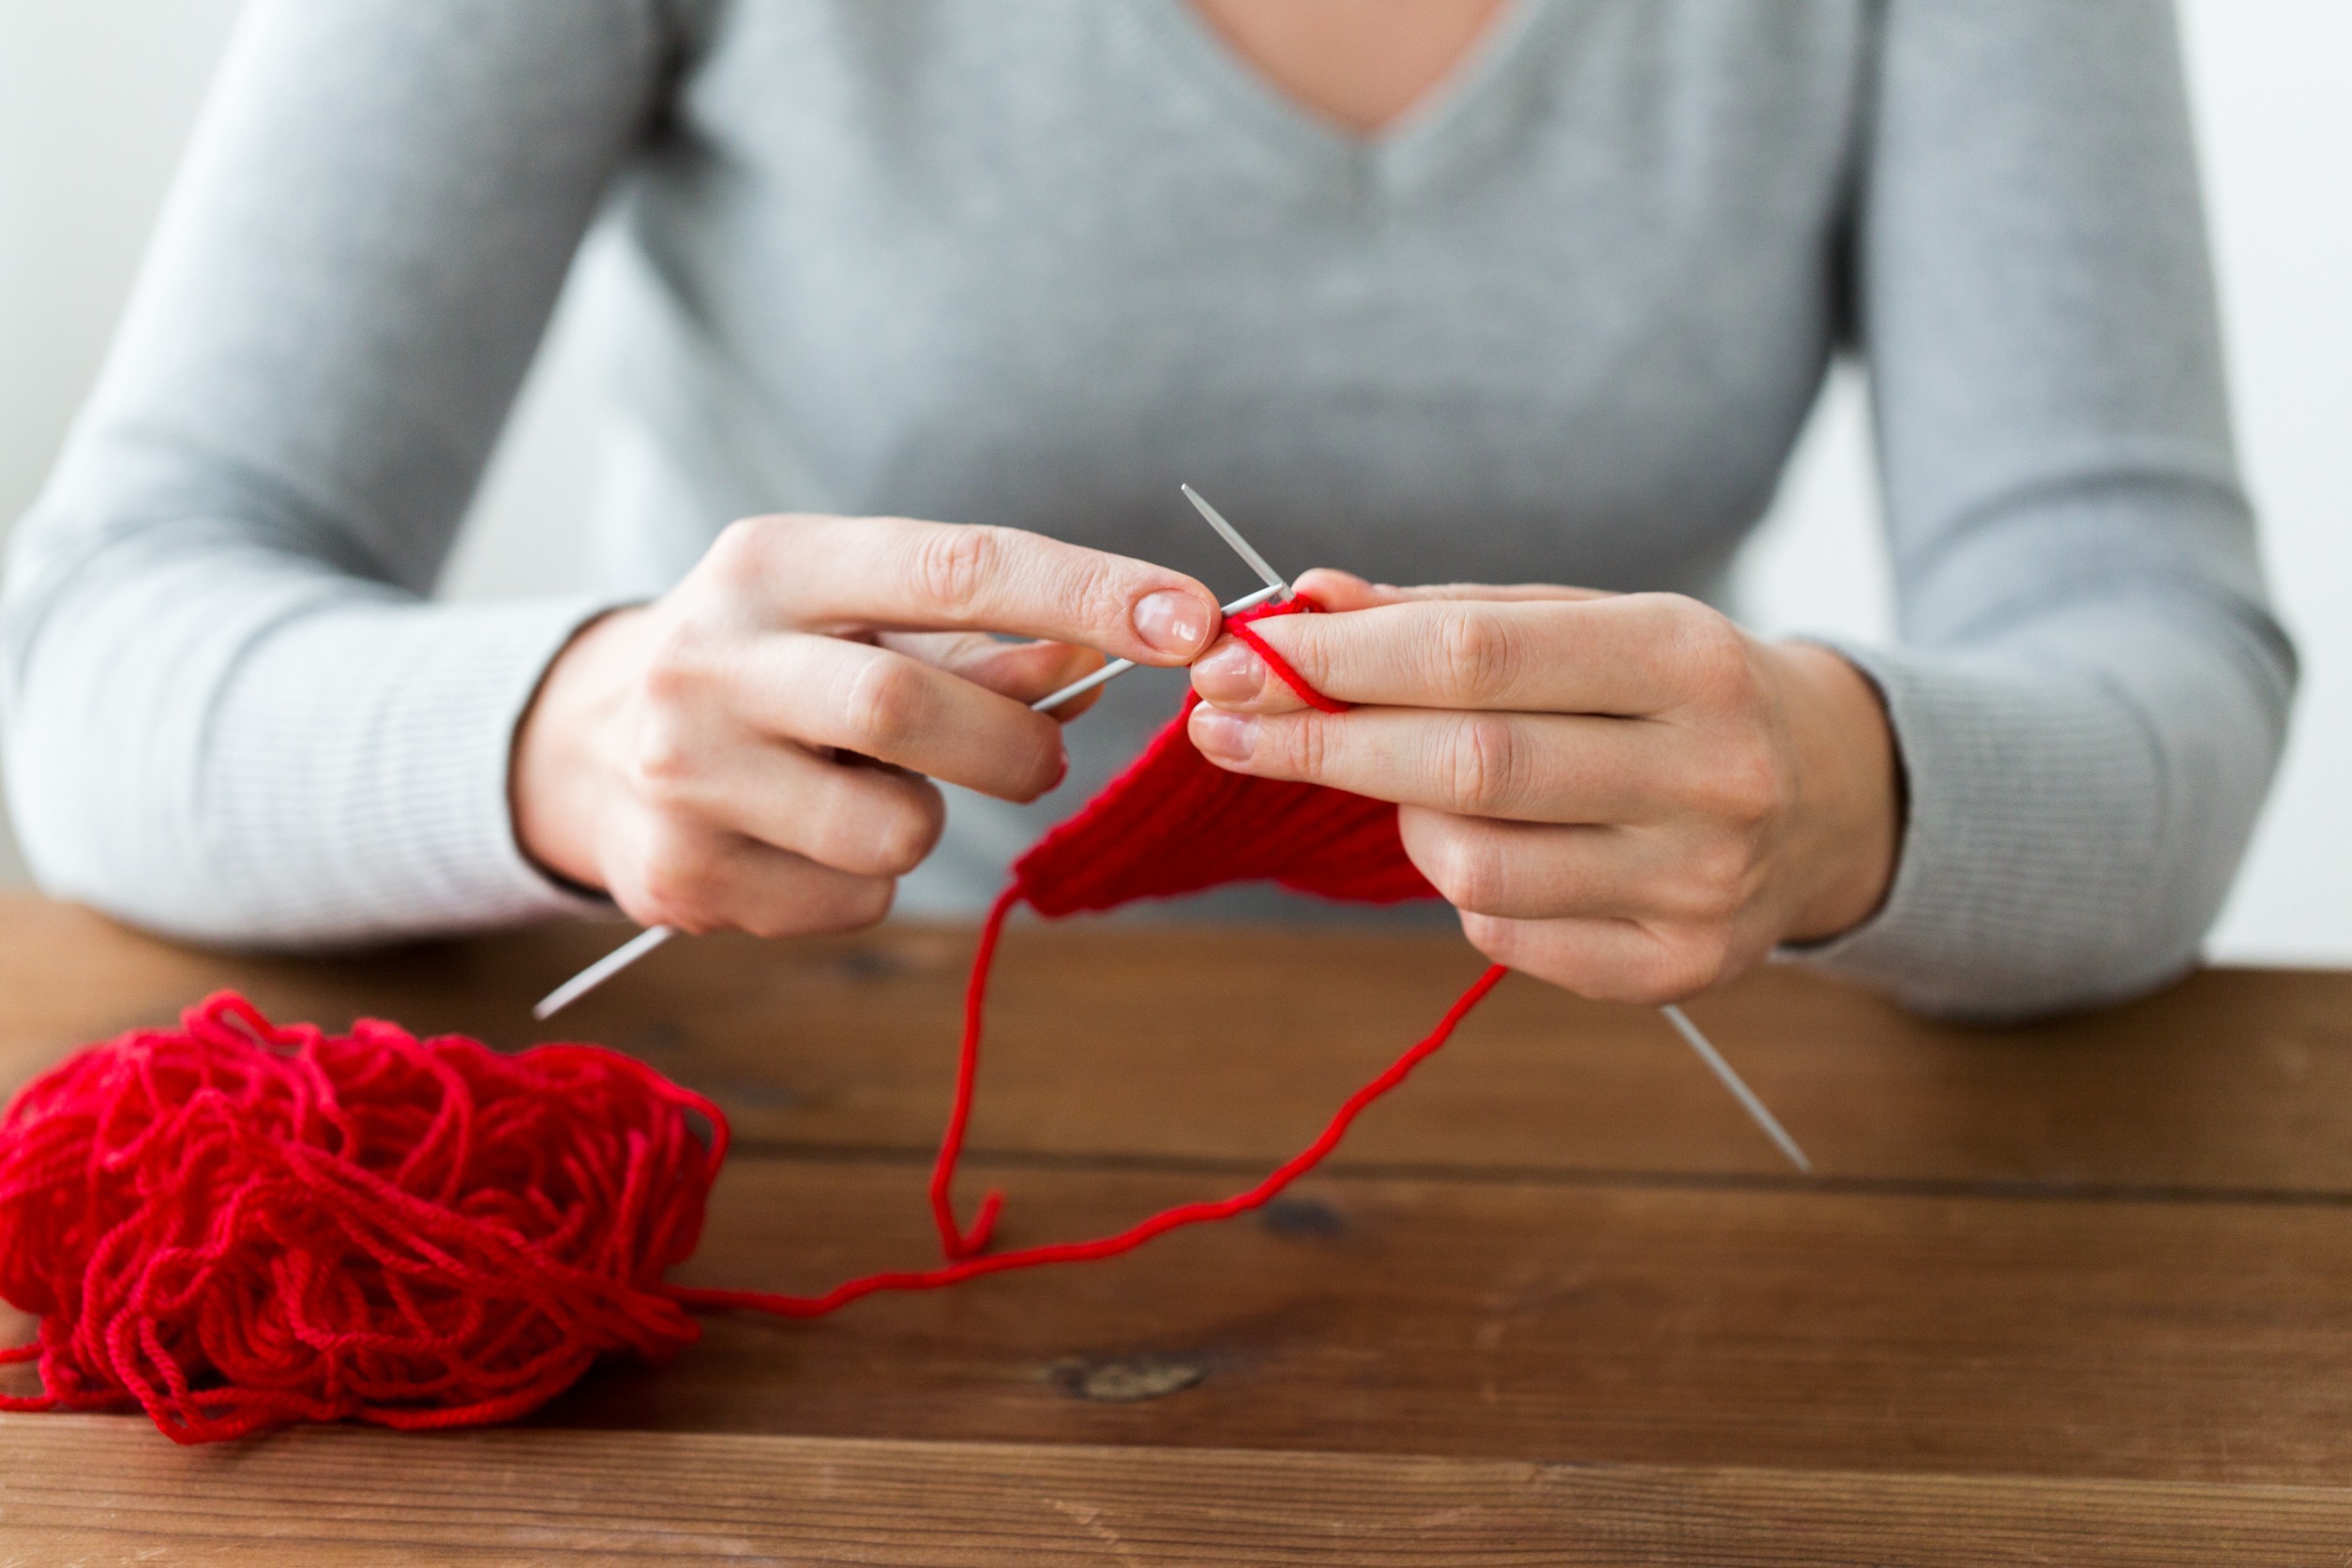 Woman knitting with needles and red yarn